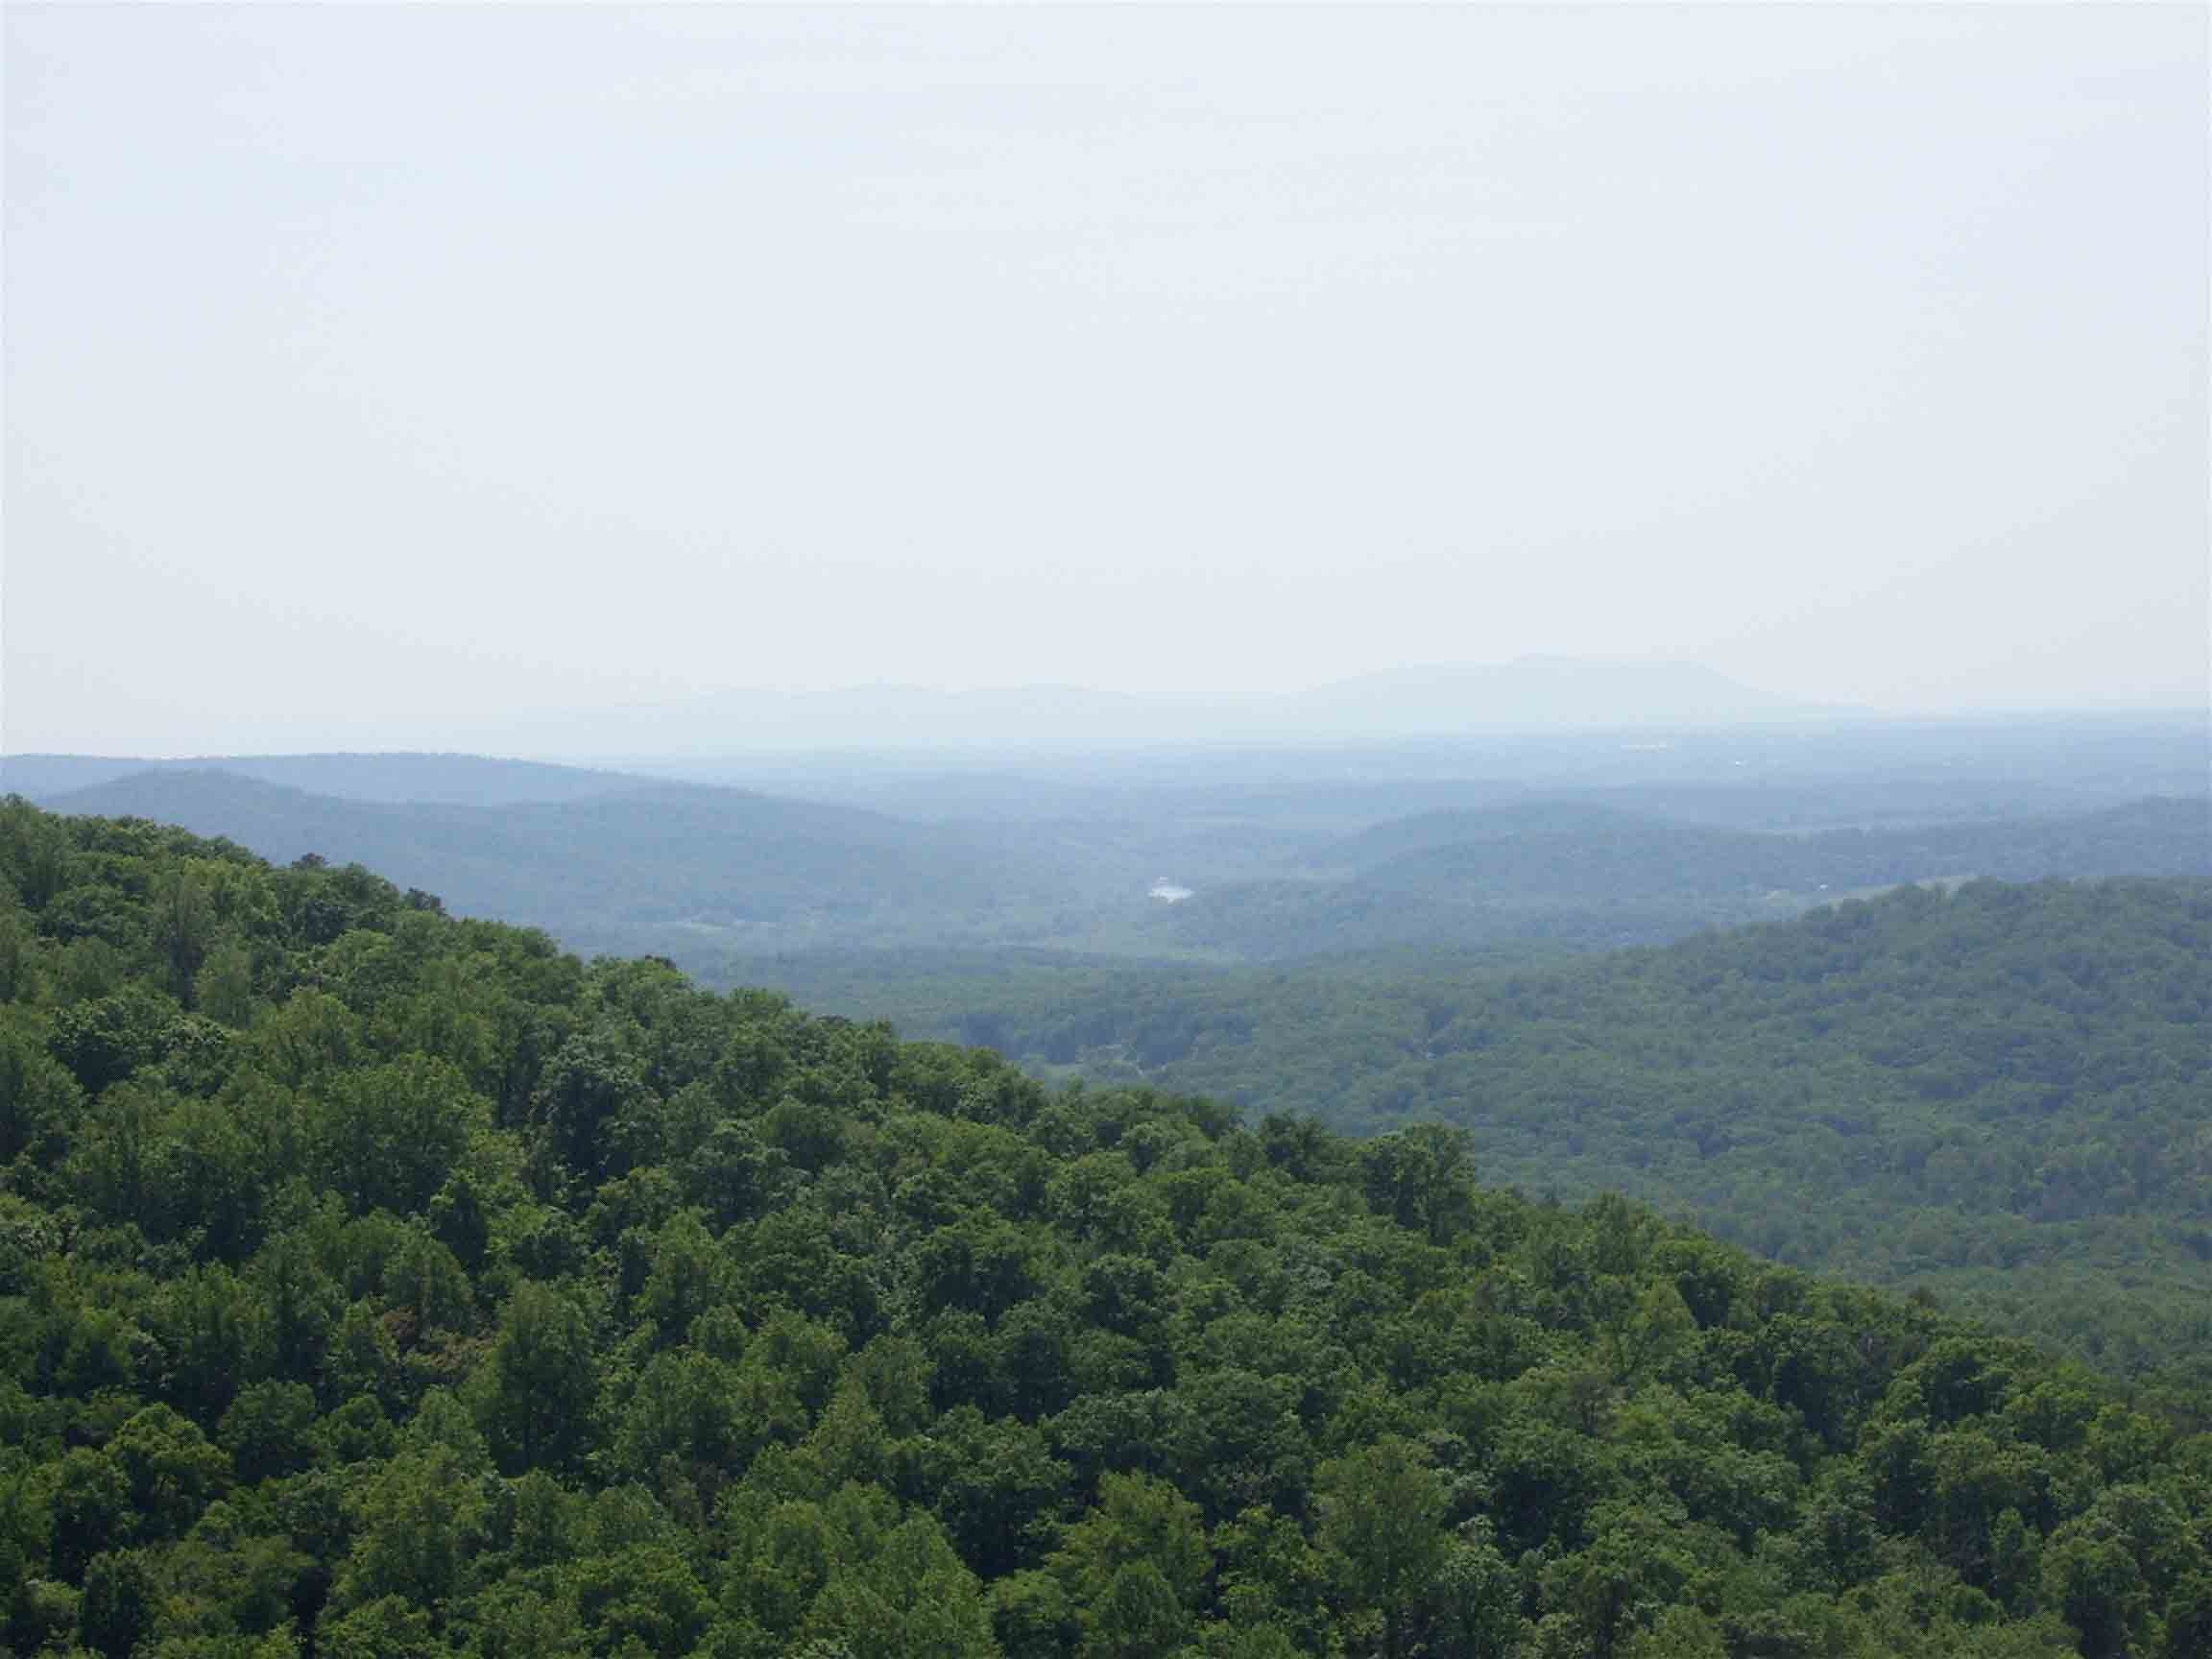 View to the southwest from Crescent Rock (Mile 10.9). The Shenandoah River can be seen. In the hazy far distancce is Massanutten Mountain.  Courtesy dlcul@conncoll.edu